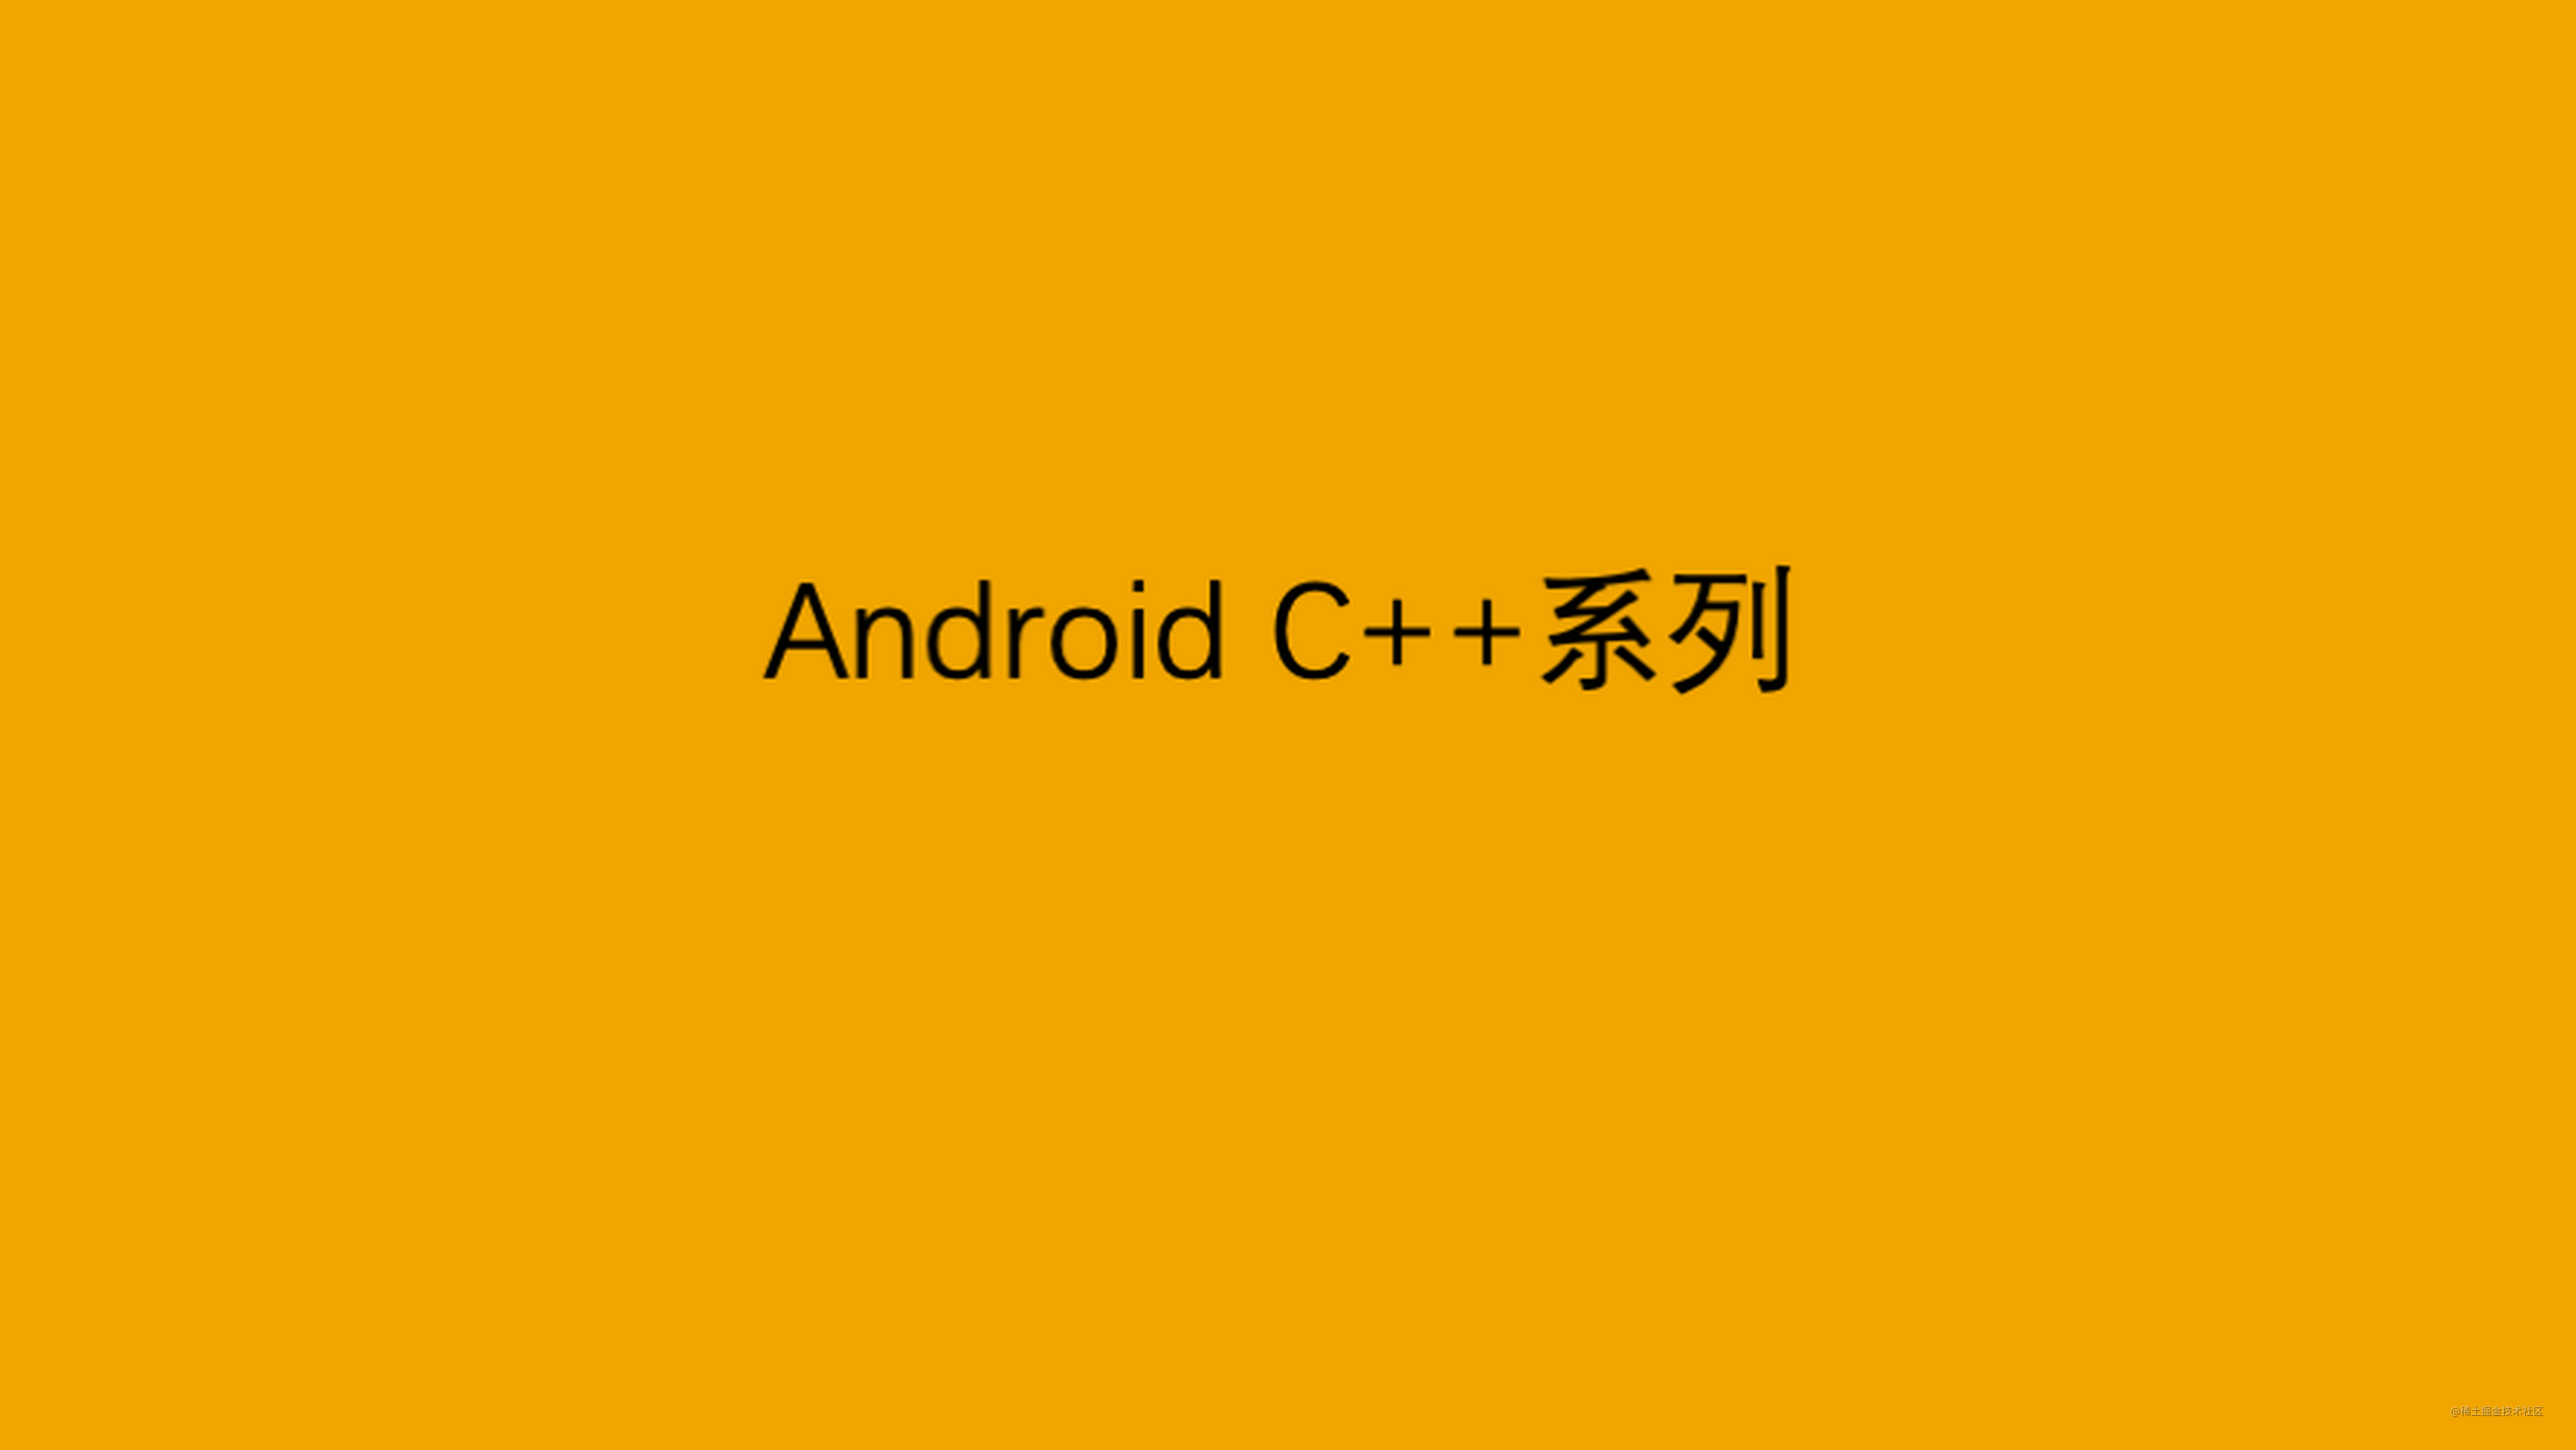 Android C++系列：C++最佳实践6 constexpr与decltype